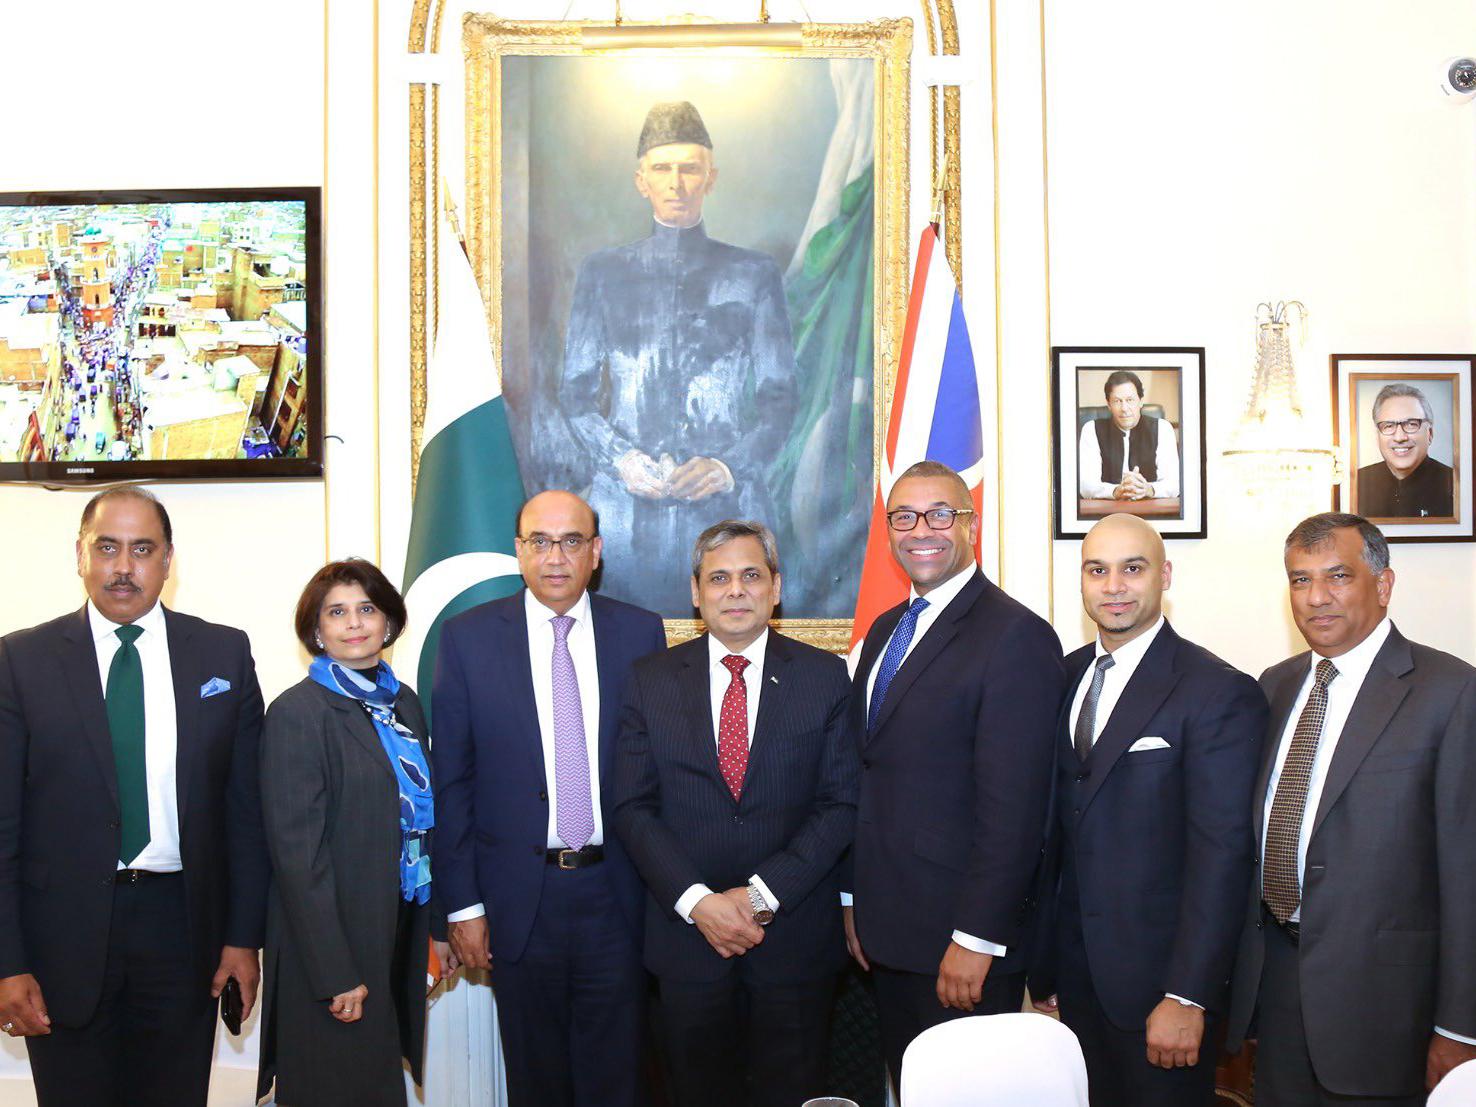 Reception by H.E  @ZakariaNafees  to celebrate Lord Zameer Choudrey CBE elevation to the House of Lords, Chair  @ConservativeFOP   @Conservatives   @JamesCleverly ,  @Andrew4Pendle  , MPs & Peers  @PakistaninUK